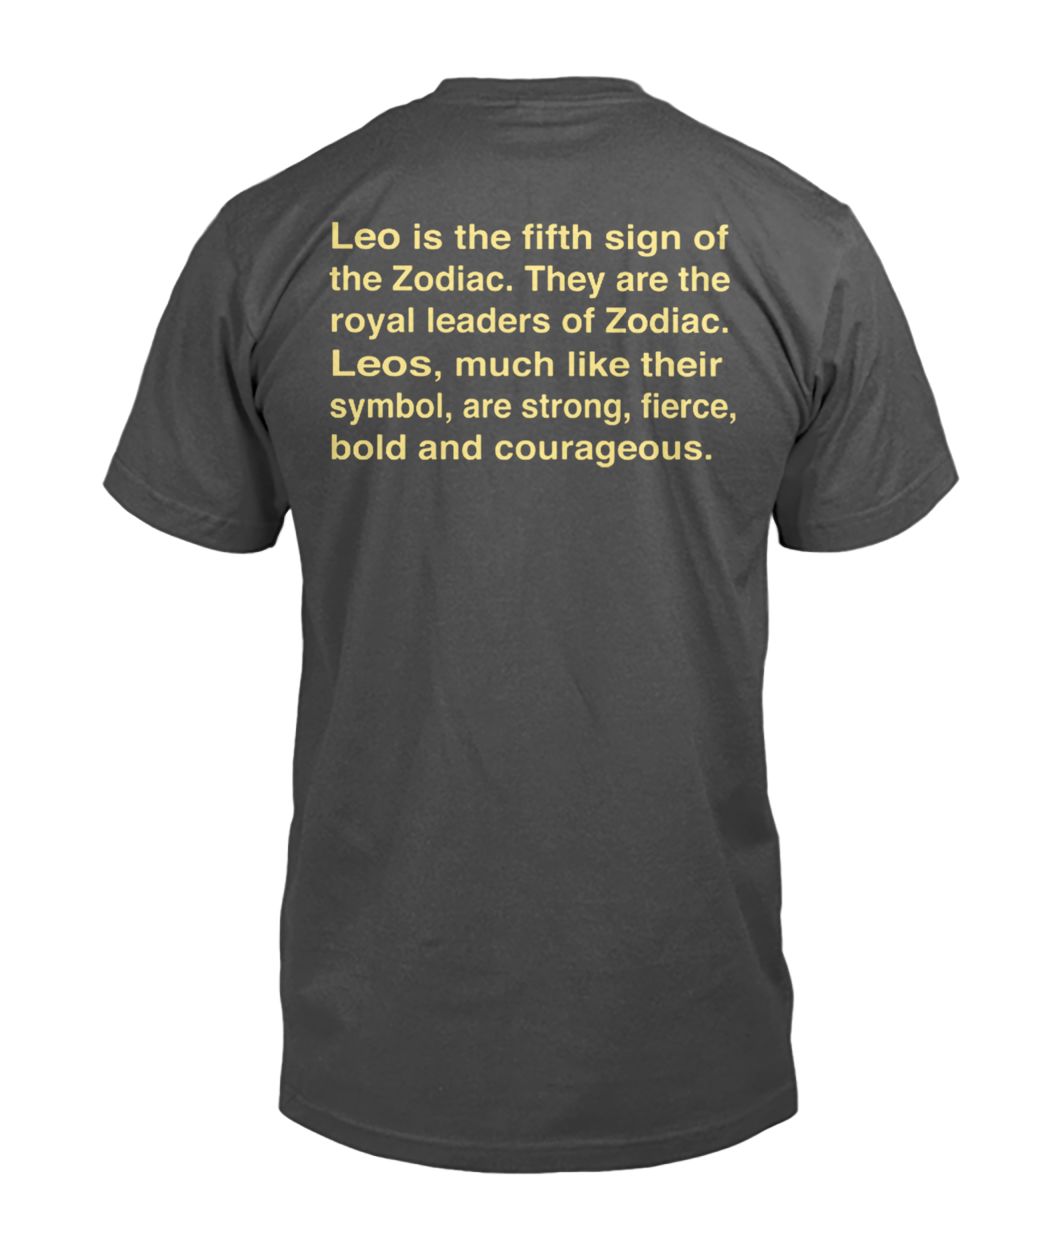 Leo is the fifth sign of the zodiac mens v-neck